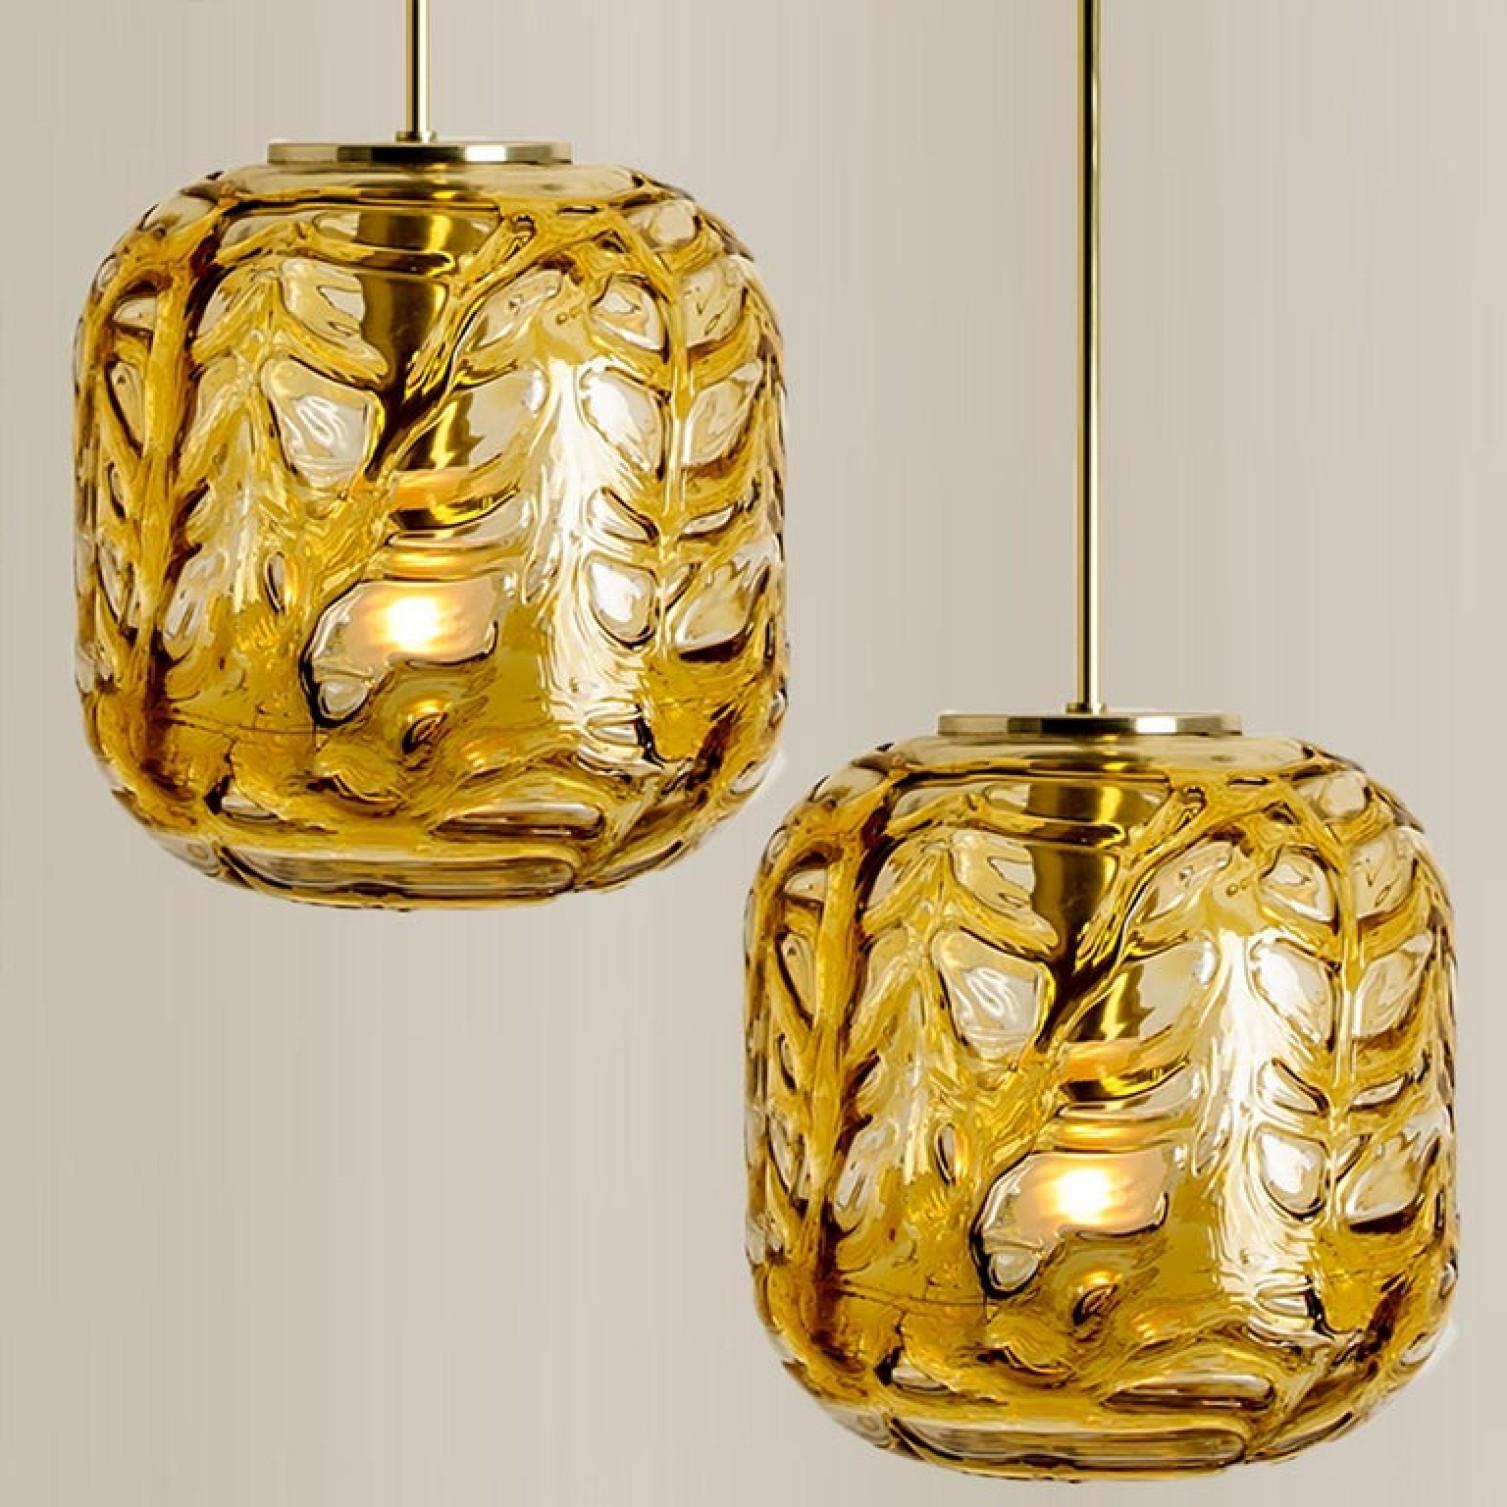 Exceptional Pair of Amber Murano Glass Pendant Lights Venini Style, 1970 For Sale 2